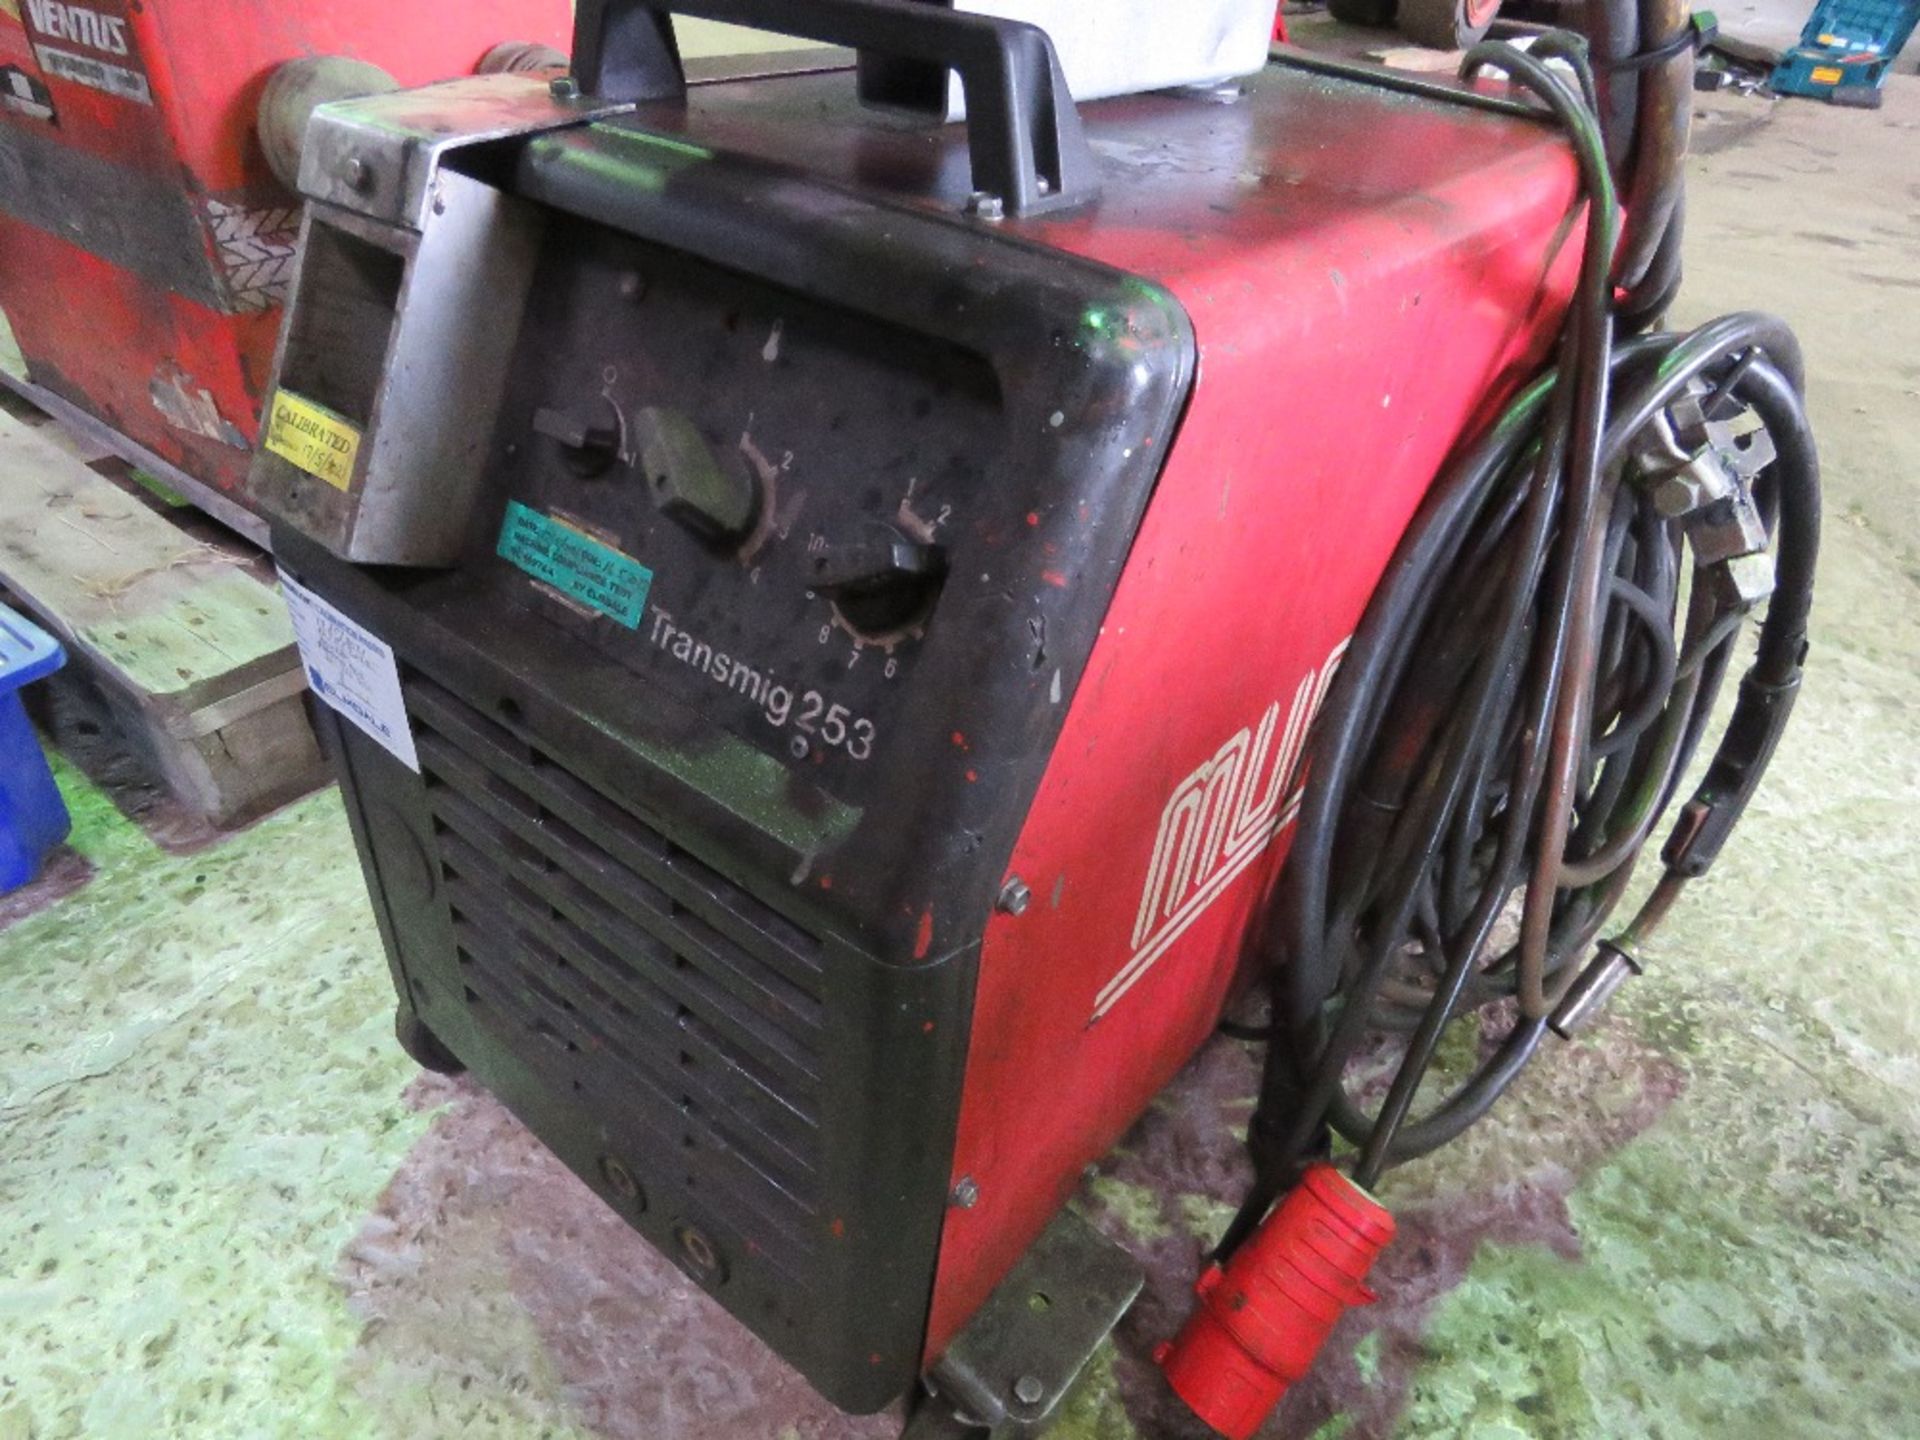 MUREX TRANSMIG 253 WELDER, 3 PHASE POWERED SOURCED FROM COMPANY LIQUIDATION. THIS LOT IS SOLD UND - Image 2 of 6